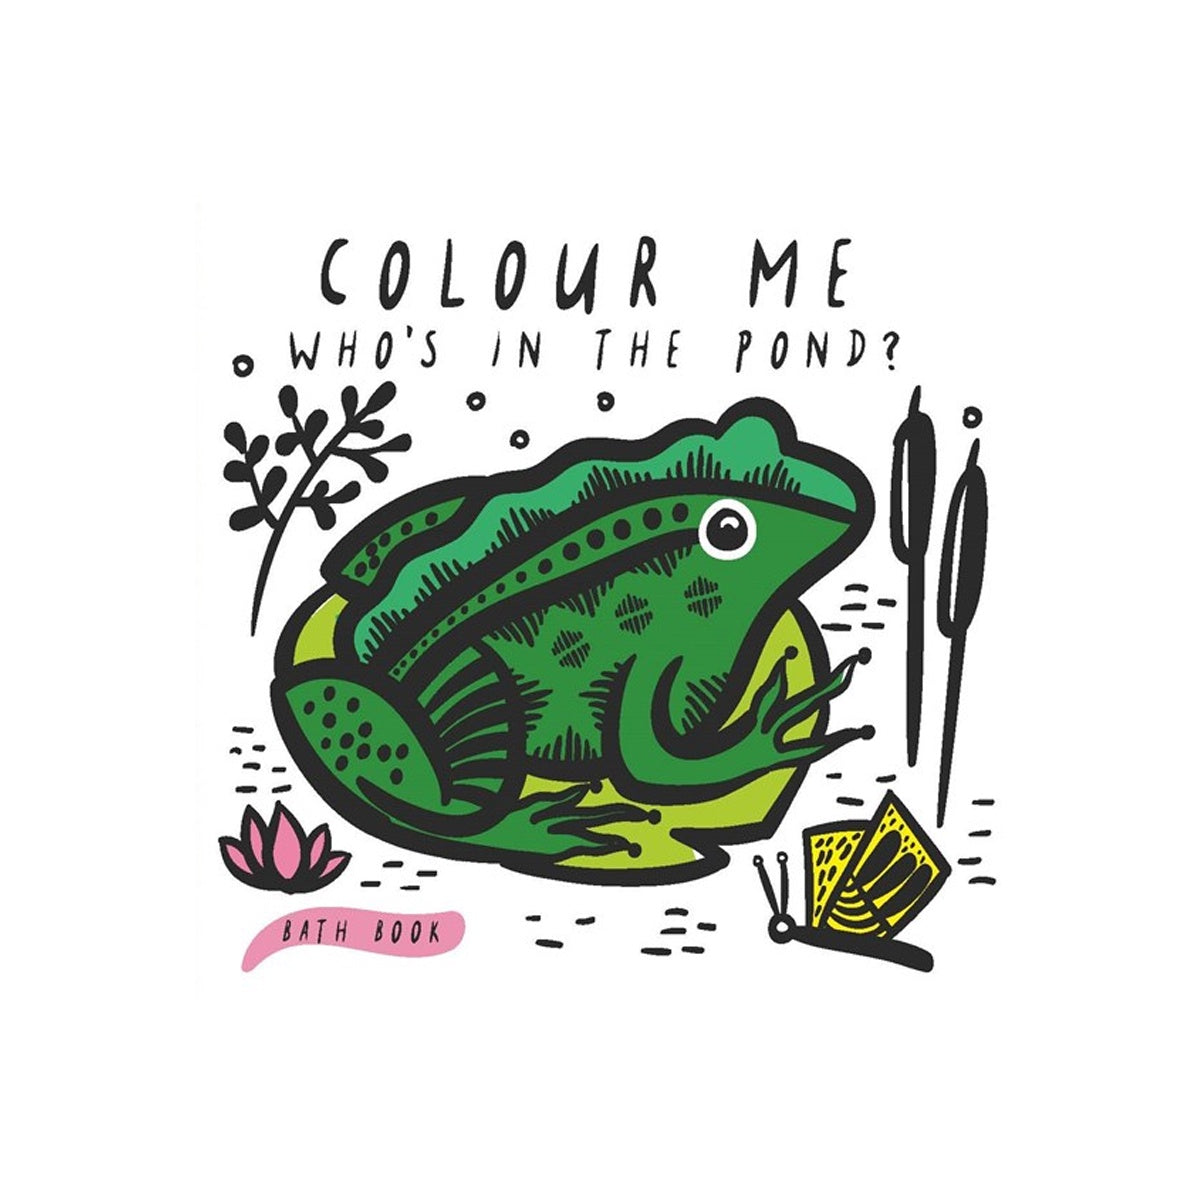 Colour Me: Who's In The Pond?